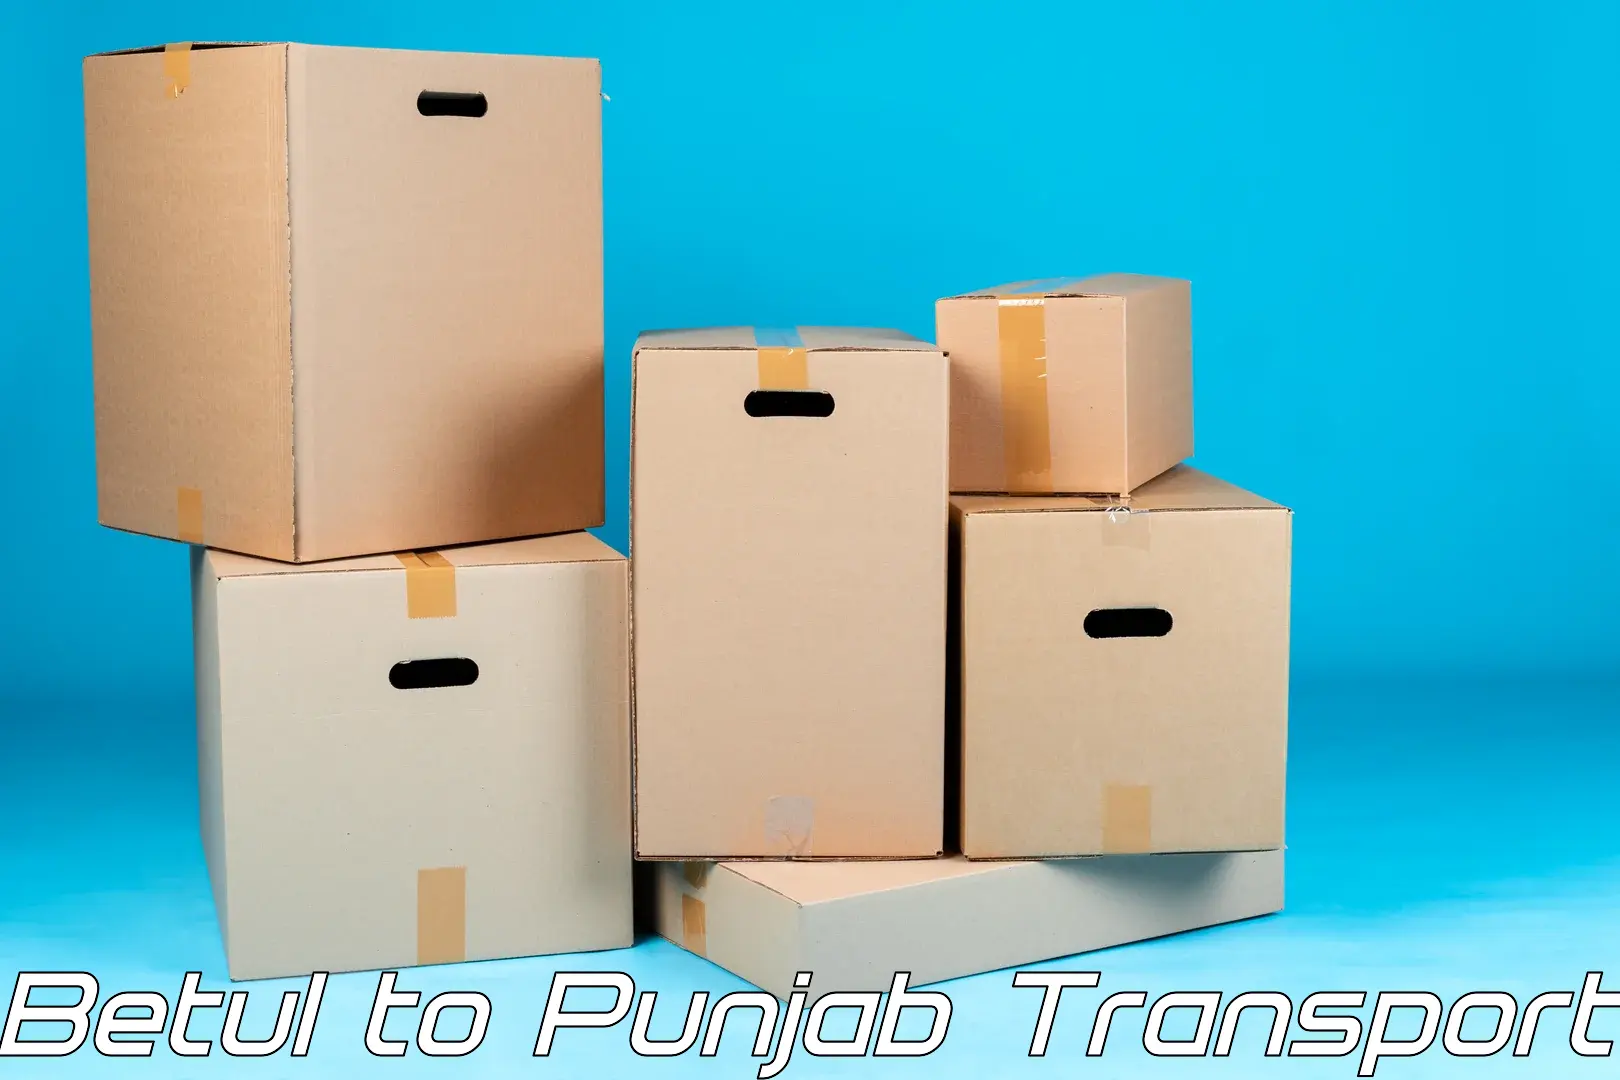 Container transport service Betul to Sultanpur Lodhi